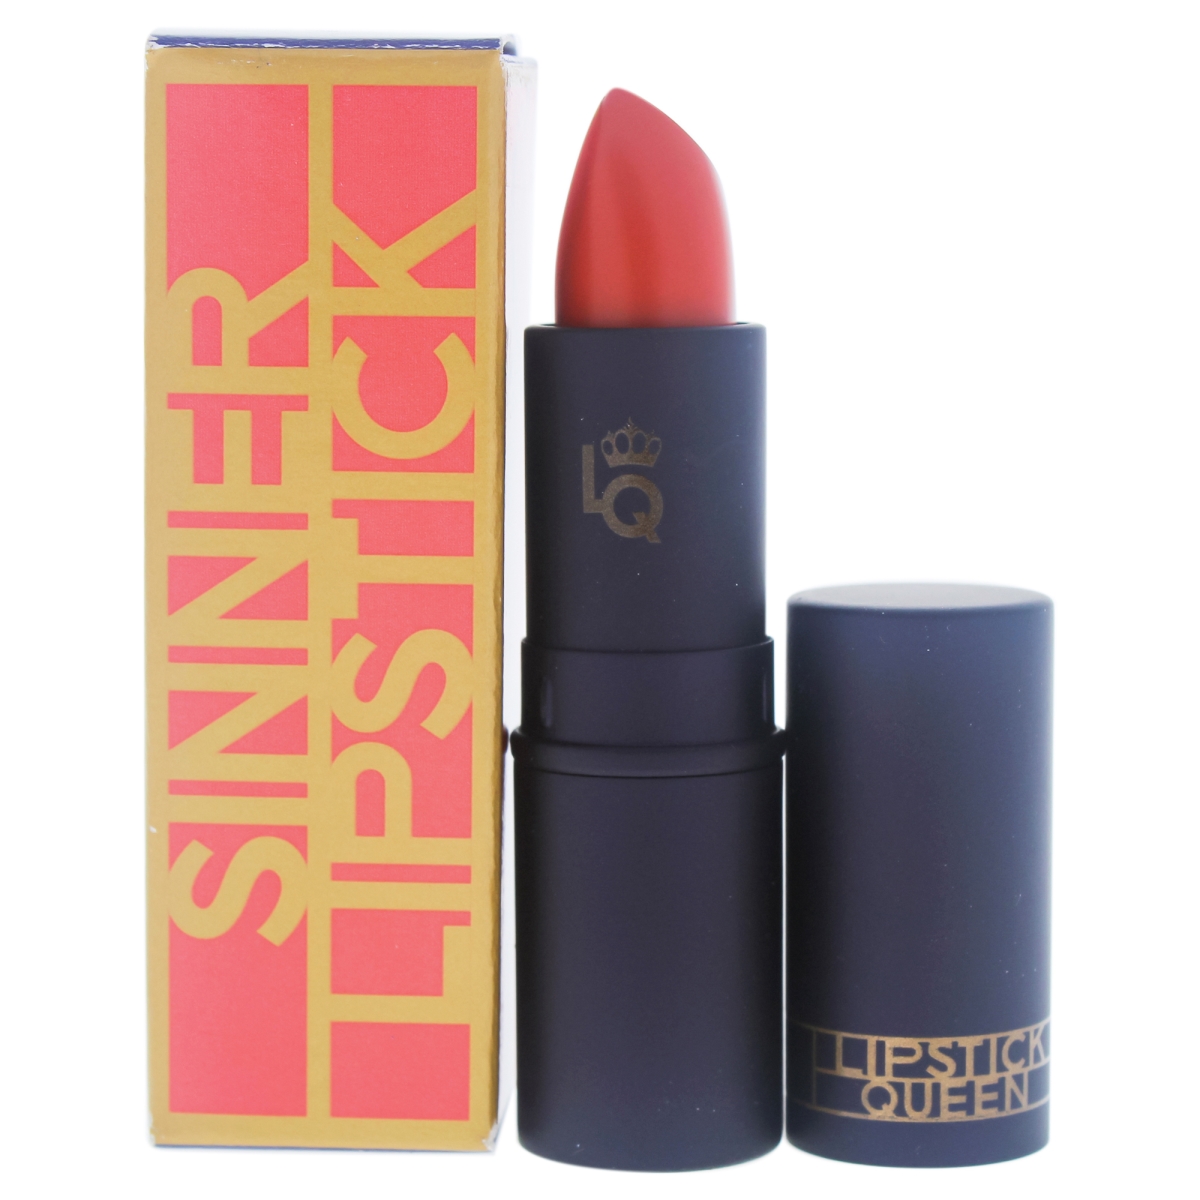 I0091858 Sinner Lipstick For Women - Coral Red - 0.12 Oz